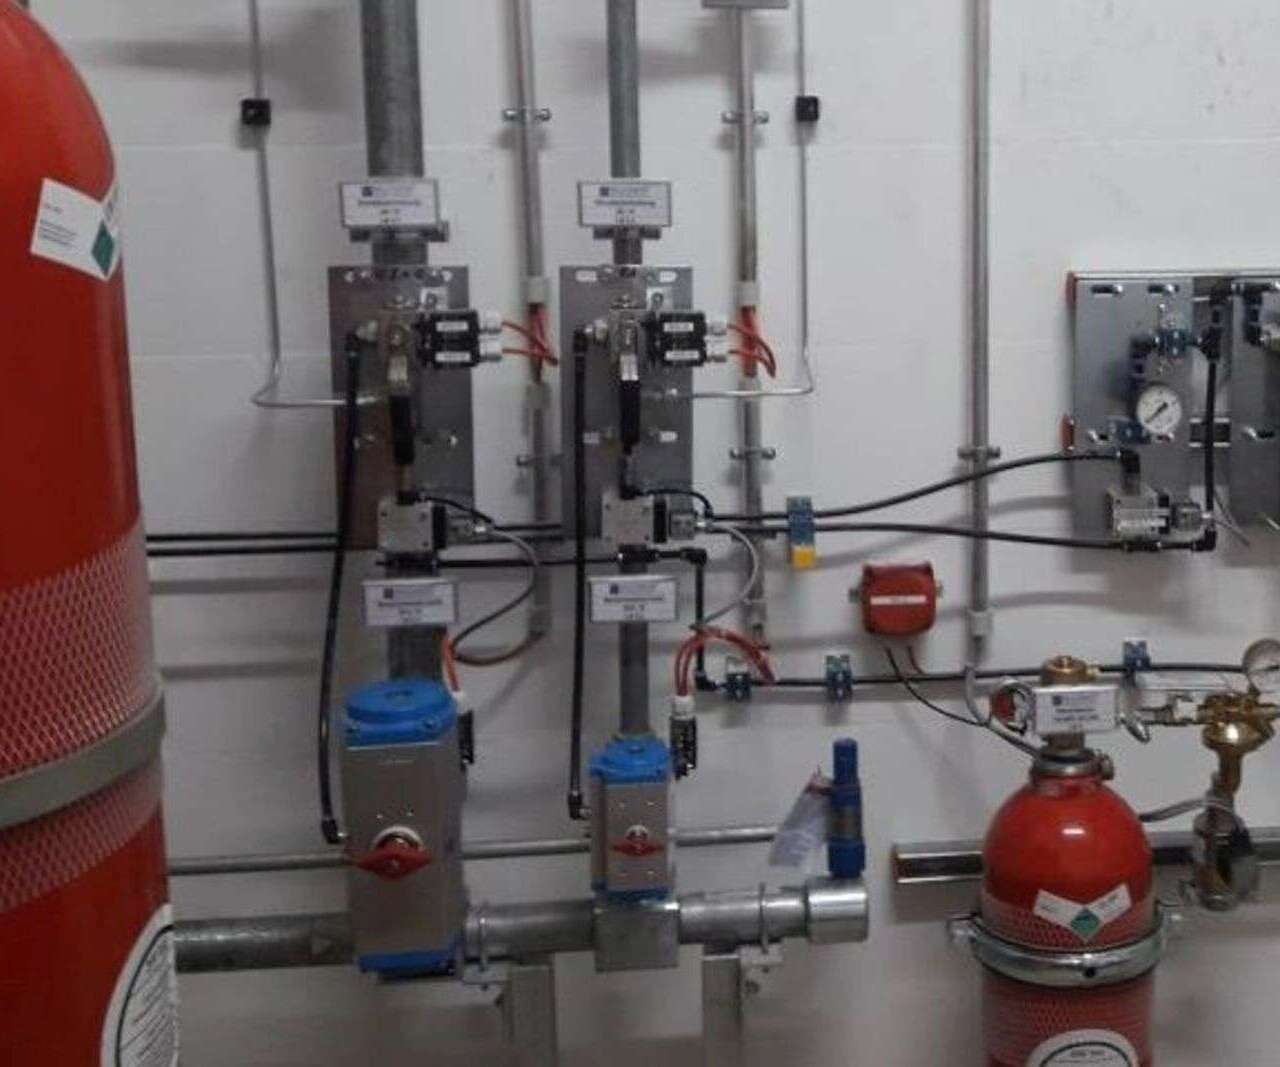 Red gas cylinders and supply lines